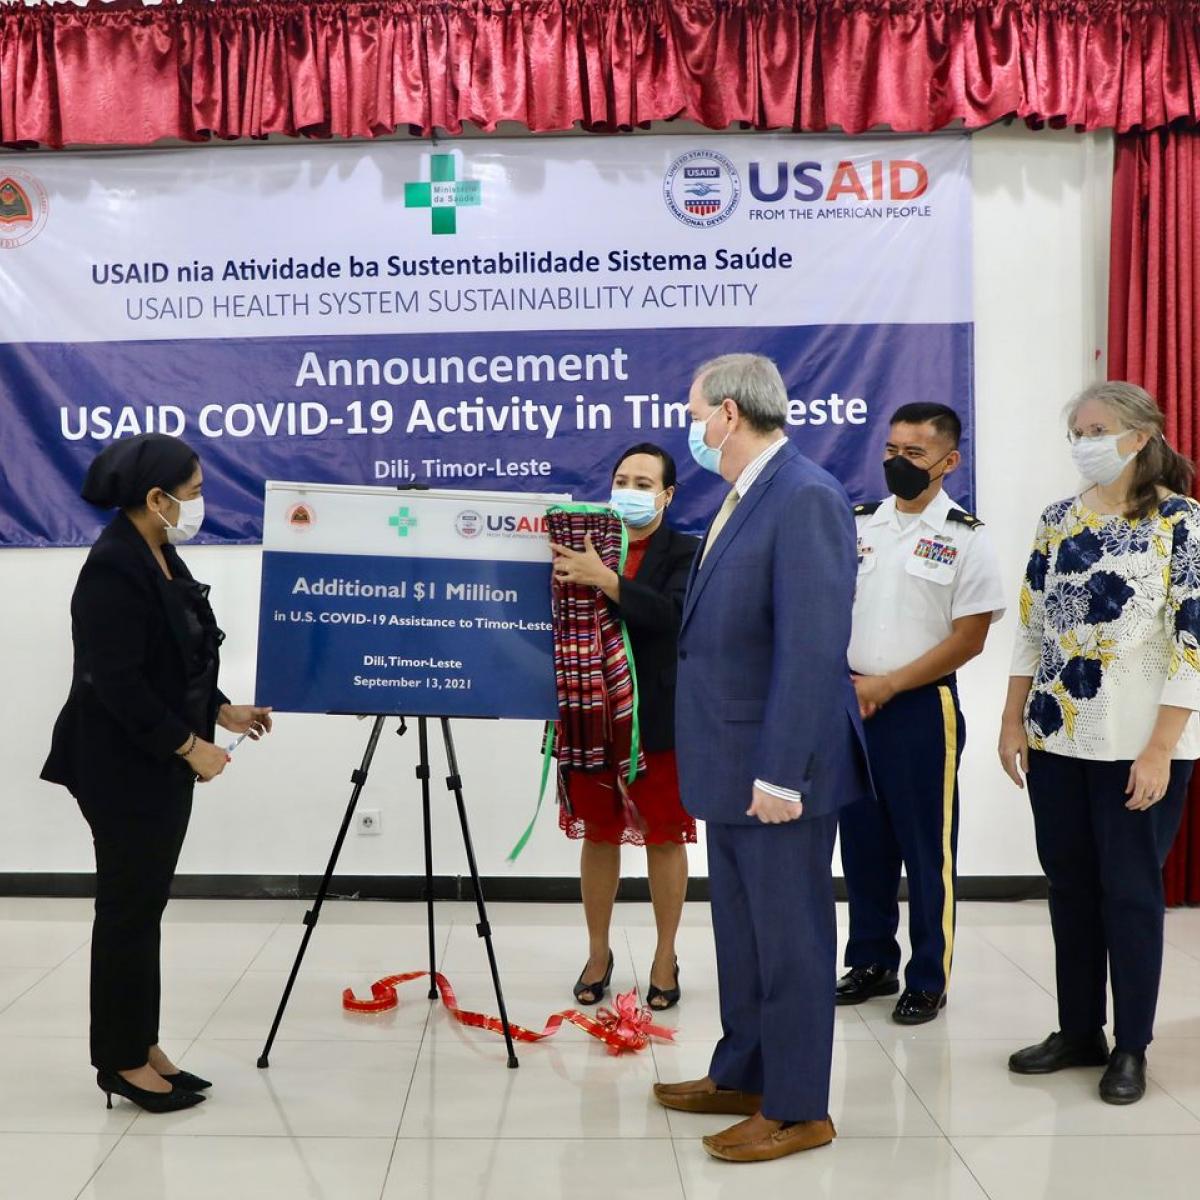 Timor-Leste's Minister of Health, Dr. Odete Belo, left, and U.S. Embassy Dili’s Chargé d’affaires Tom Daley officially announce an additional $1 million in U.S assistance to Timor-Leste through USAID.